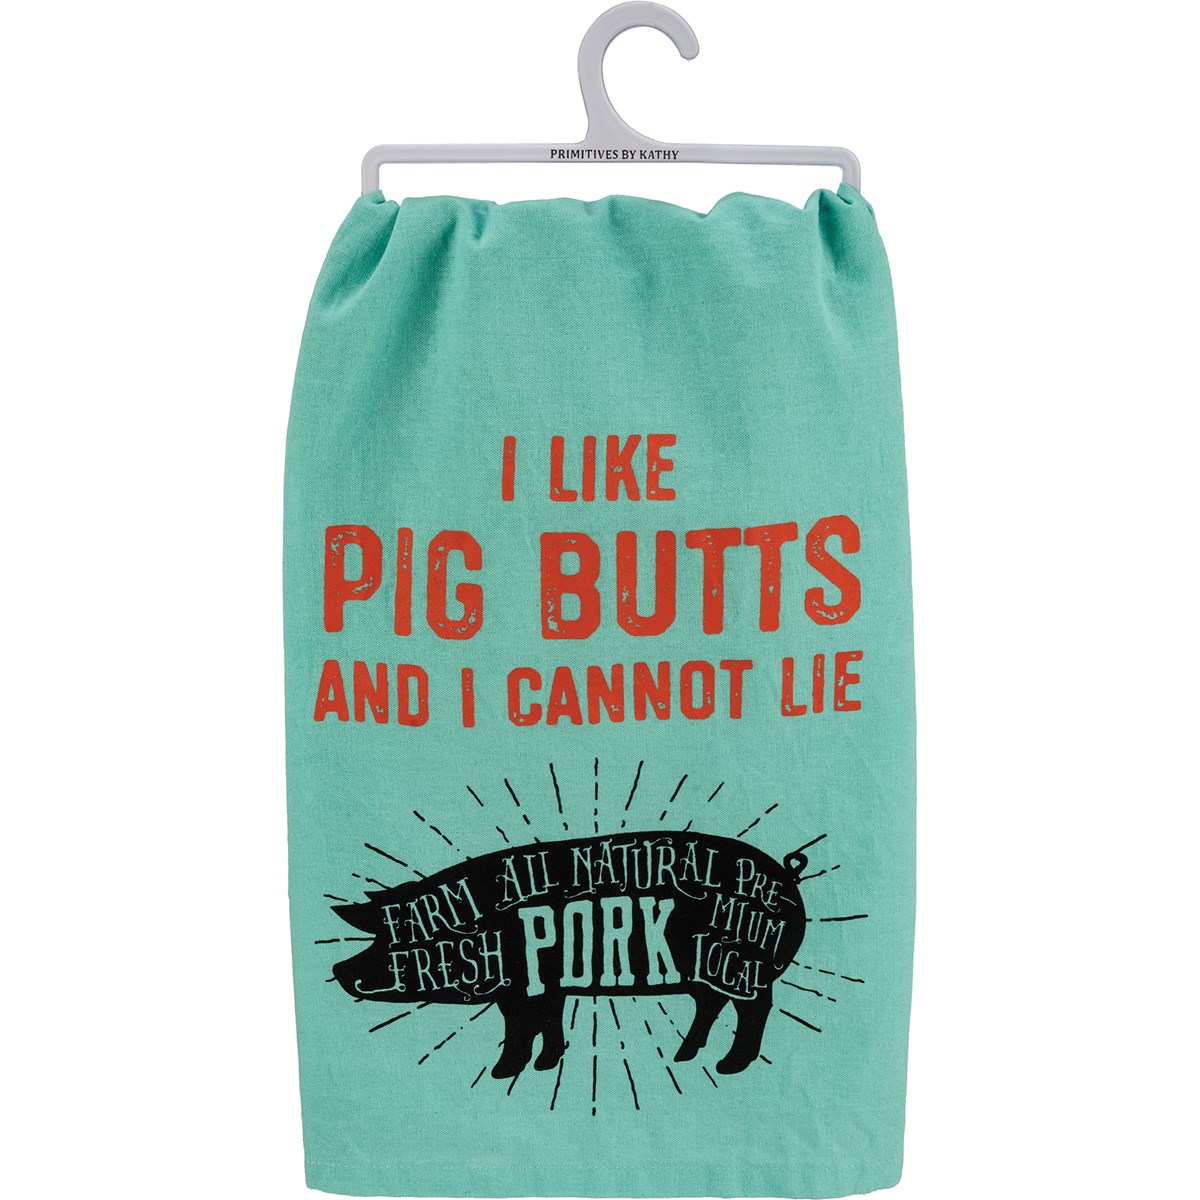 Kitchen Towel - I Like Pig Butts And I Cannot Lie - 28" x 28" - Cotton